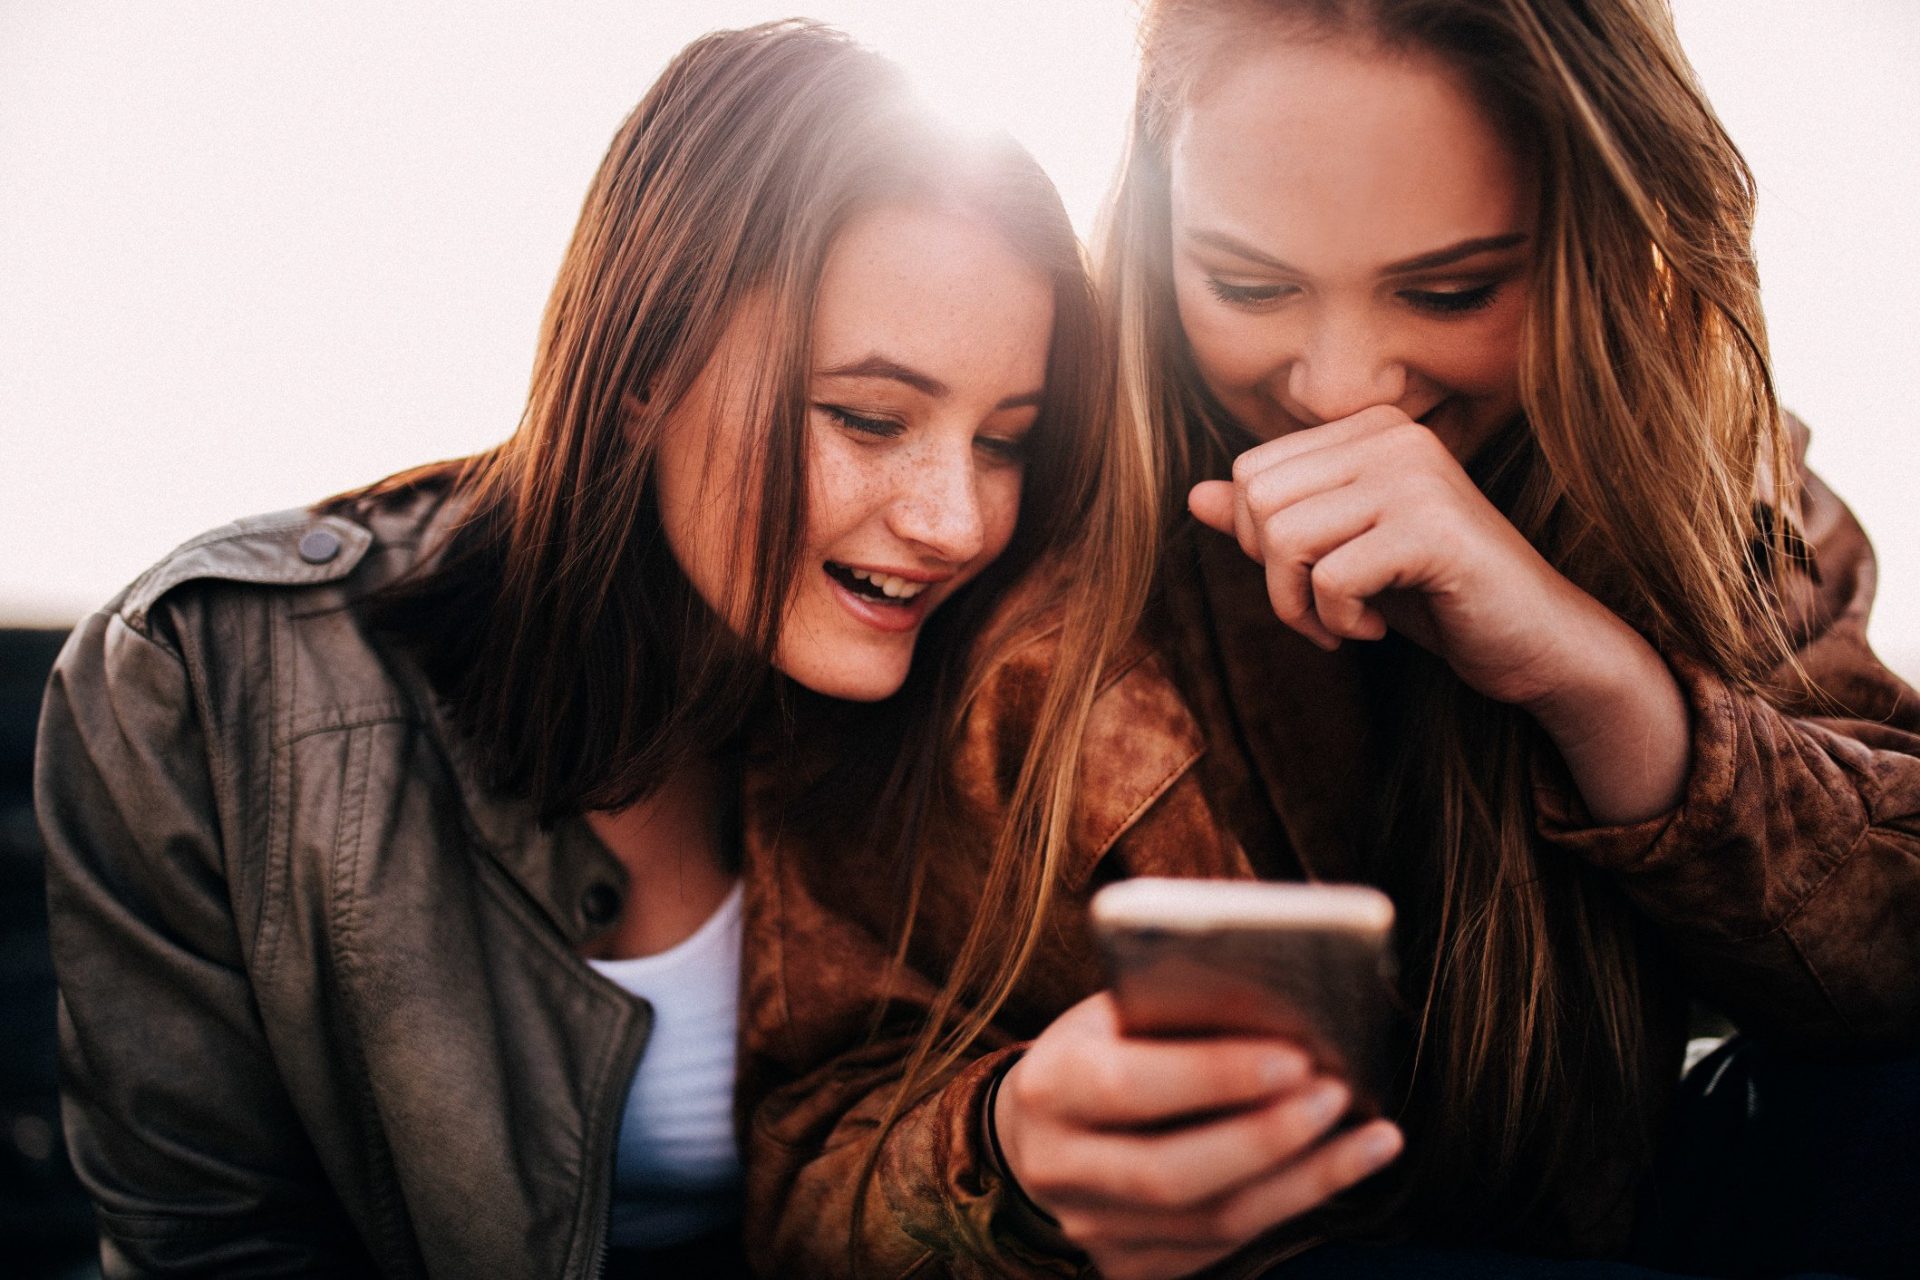 teenage girls looking at funny photos on smartphone and laughing t20 g8VNKb